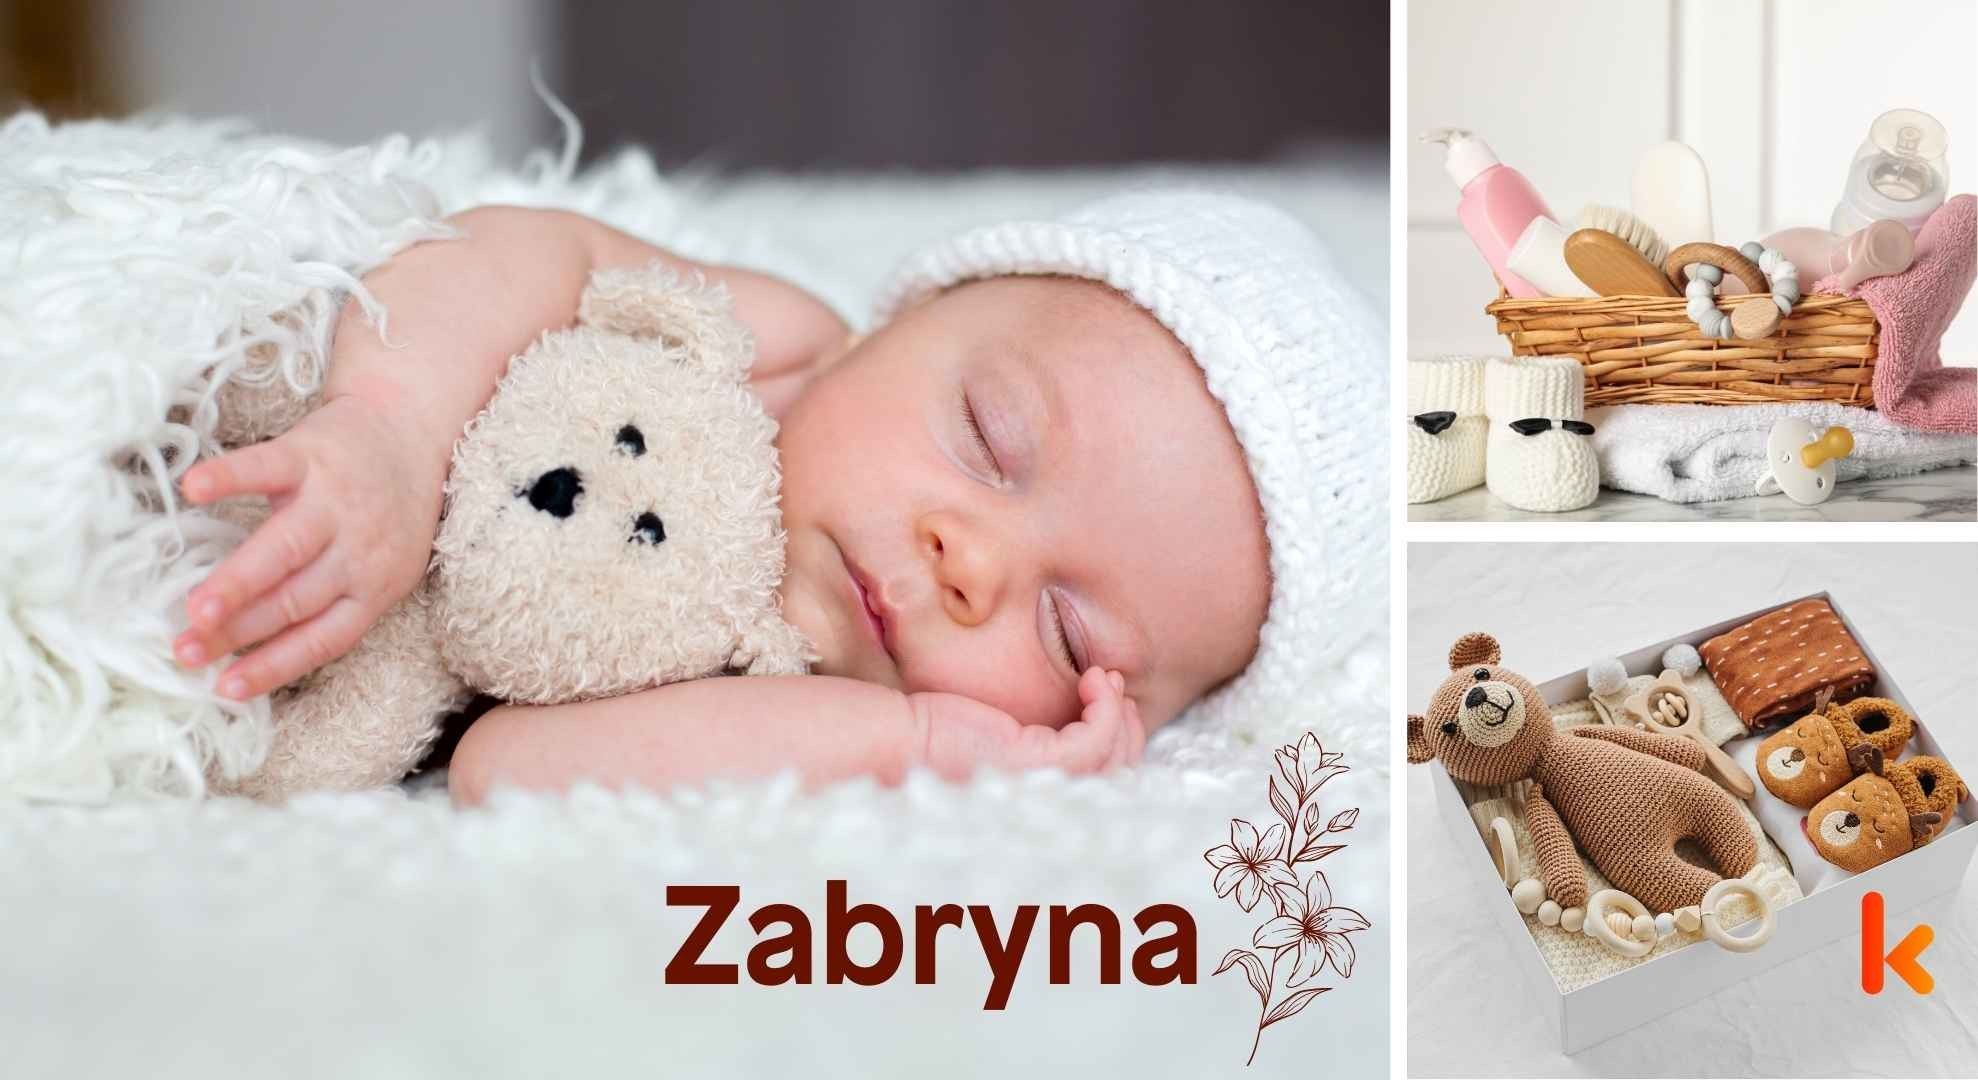 Meaning of the name Zabryna